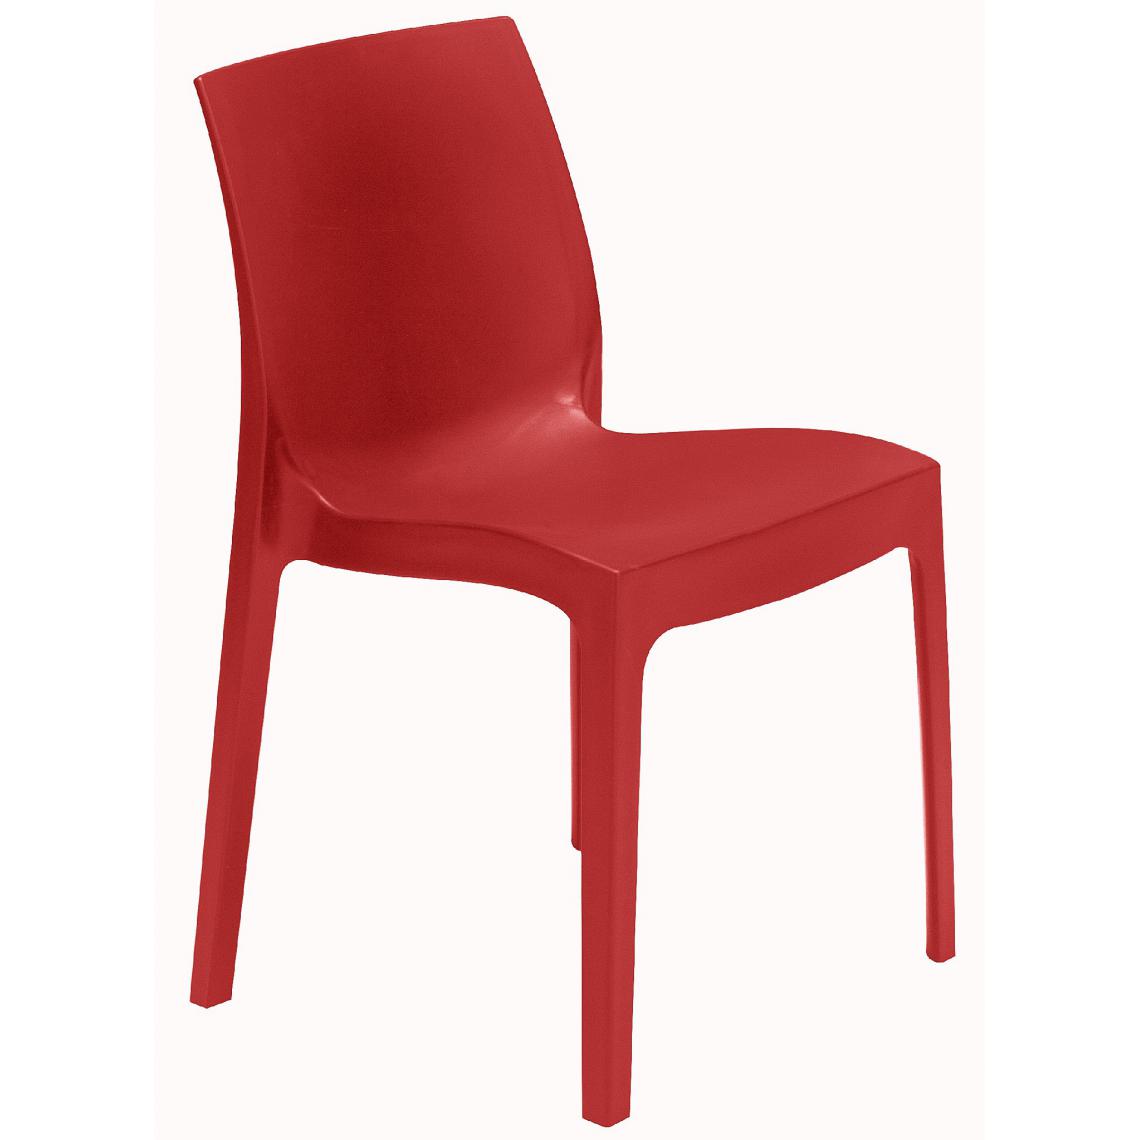 3S. x Home - Chaise Design Rouge ISTANBUL - Chaises